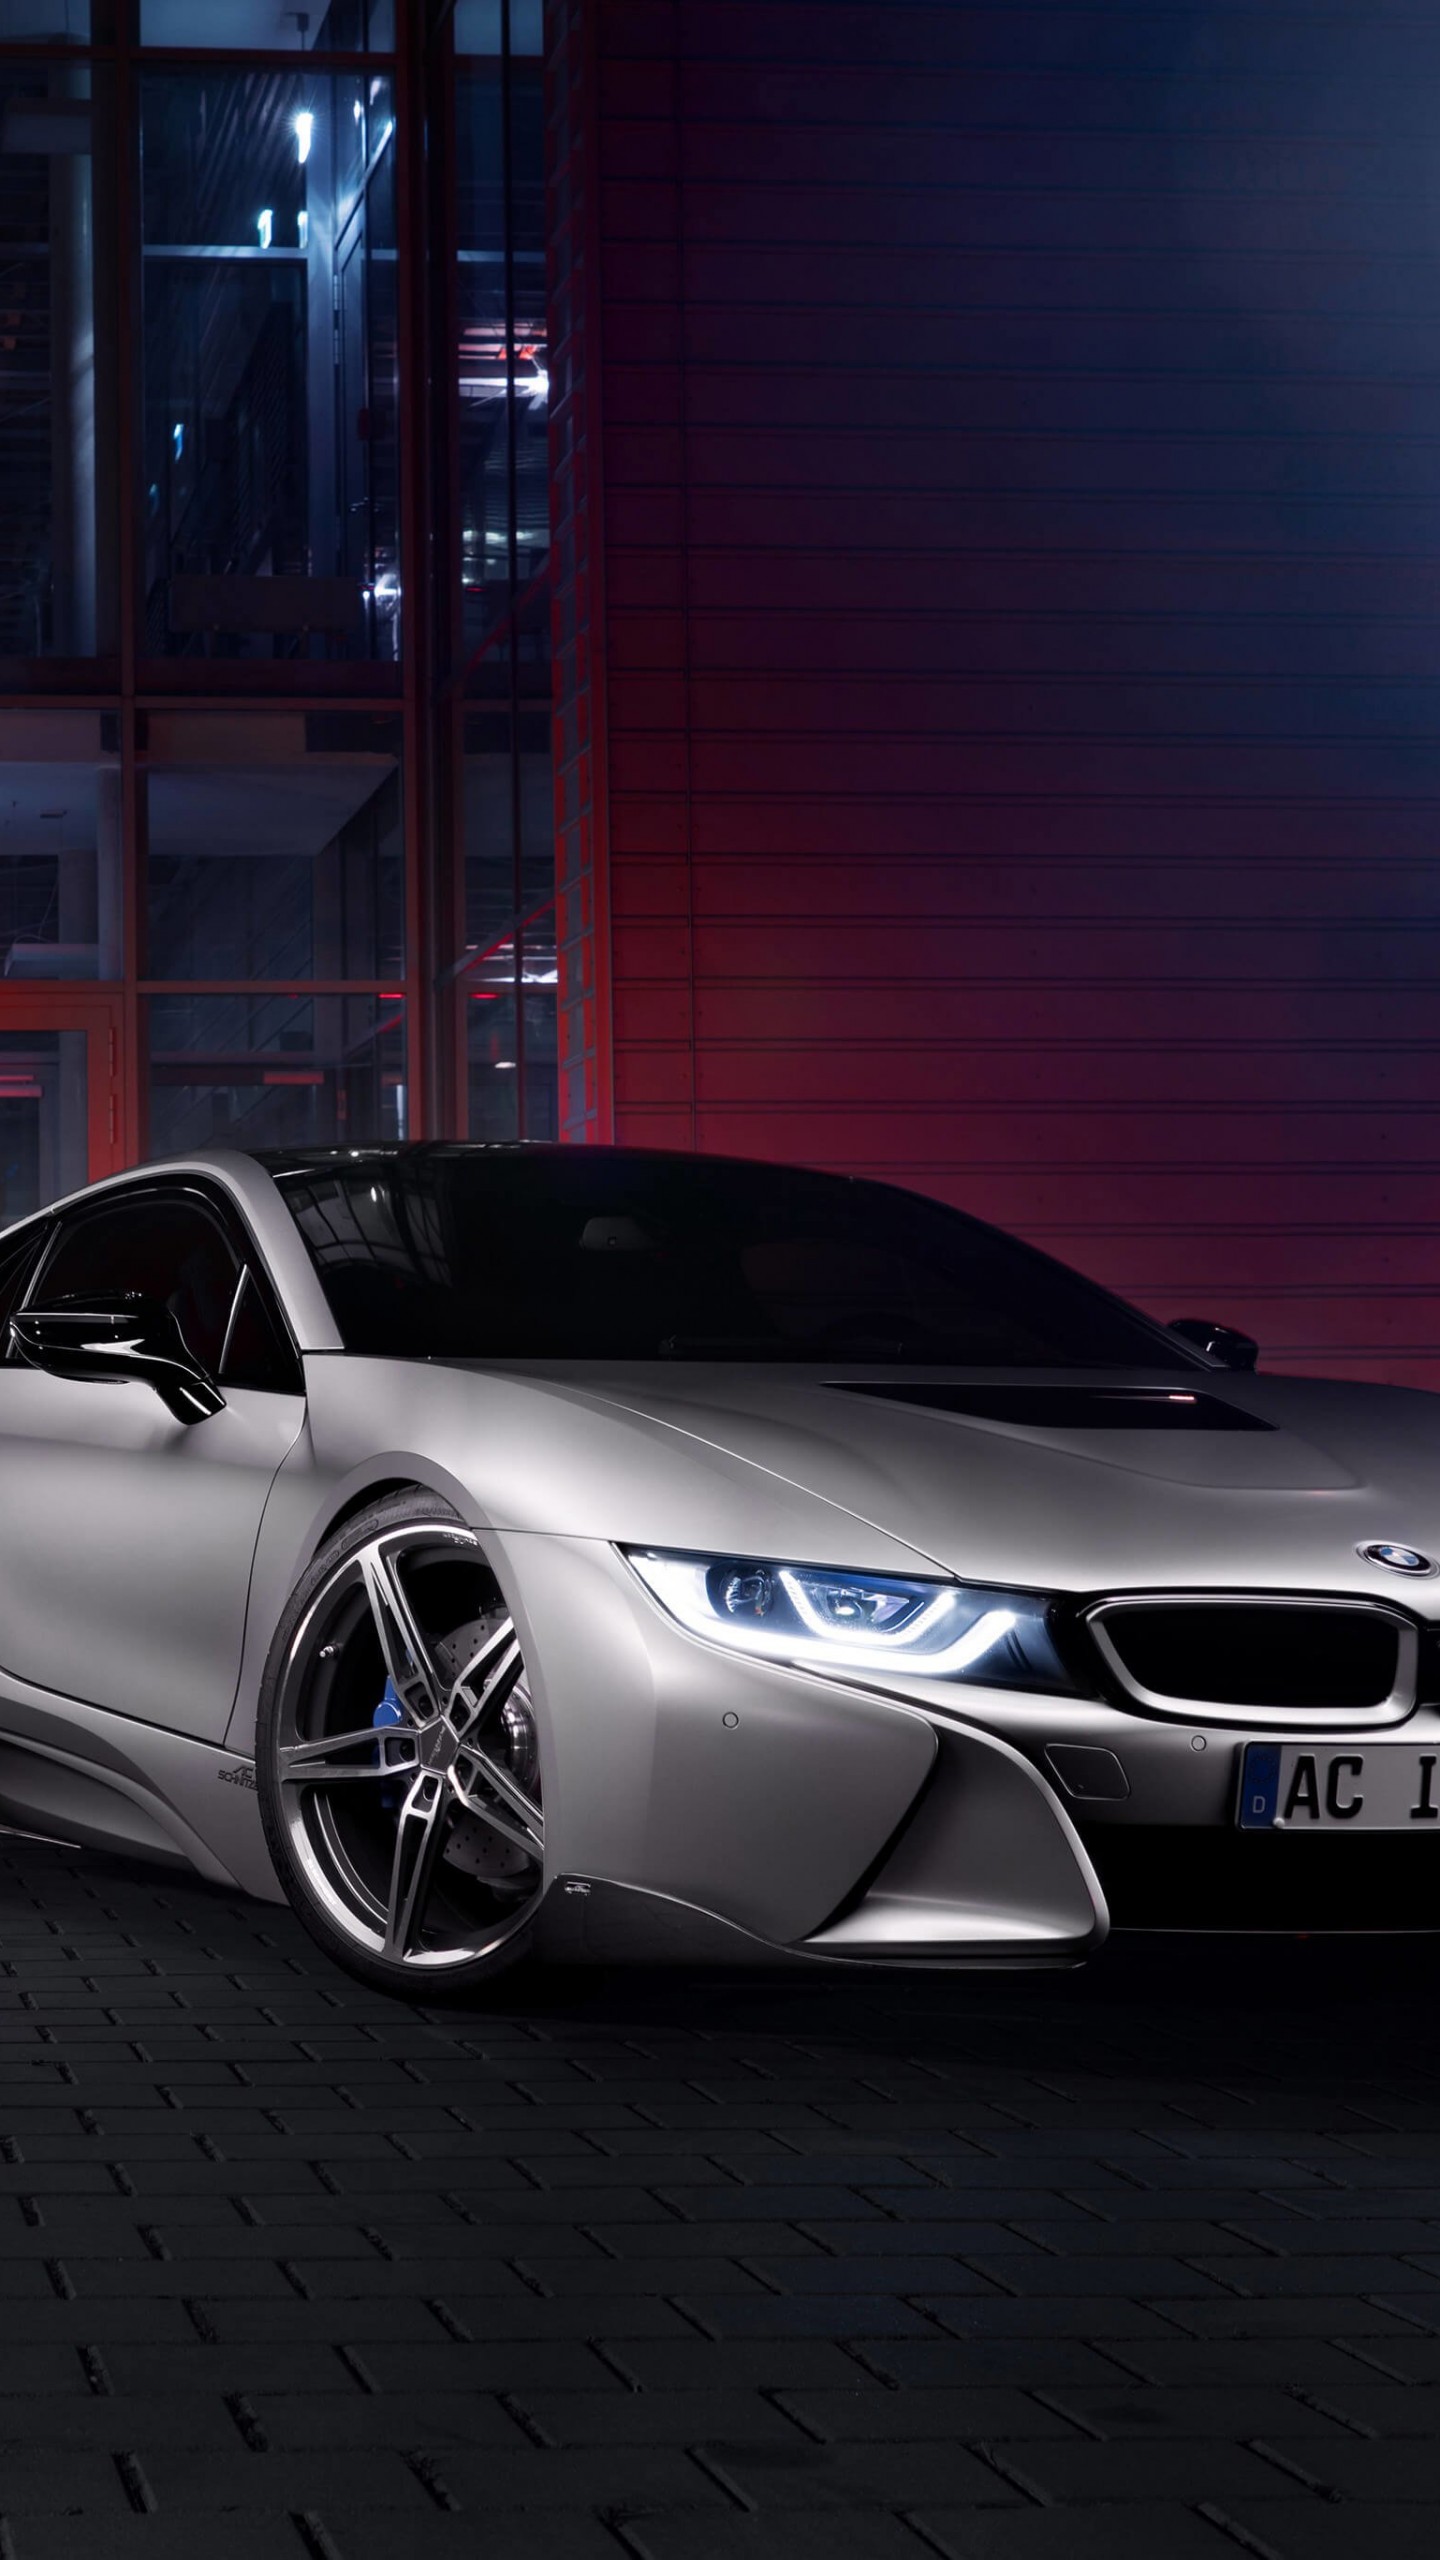 BMW i8 designed by AC Schnitzer Wallpaper for SAMSUNG Galaxy Note 4